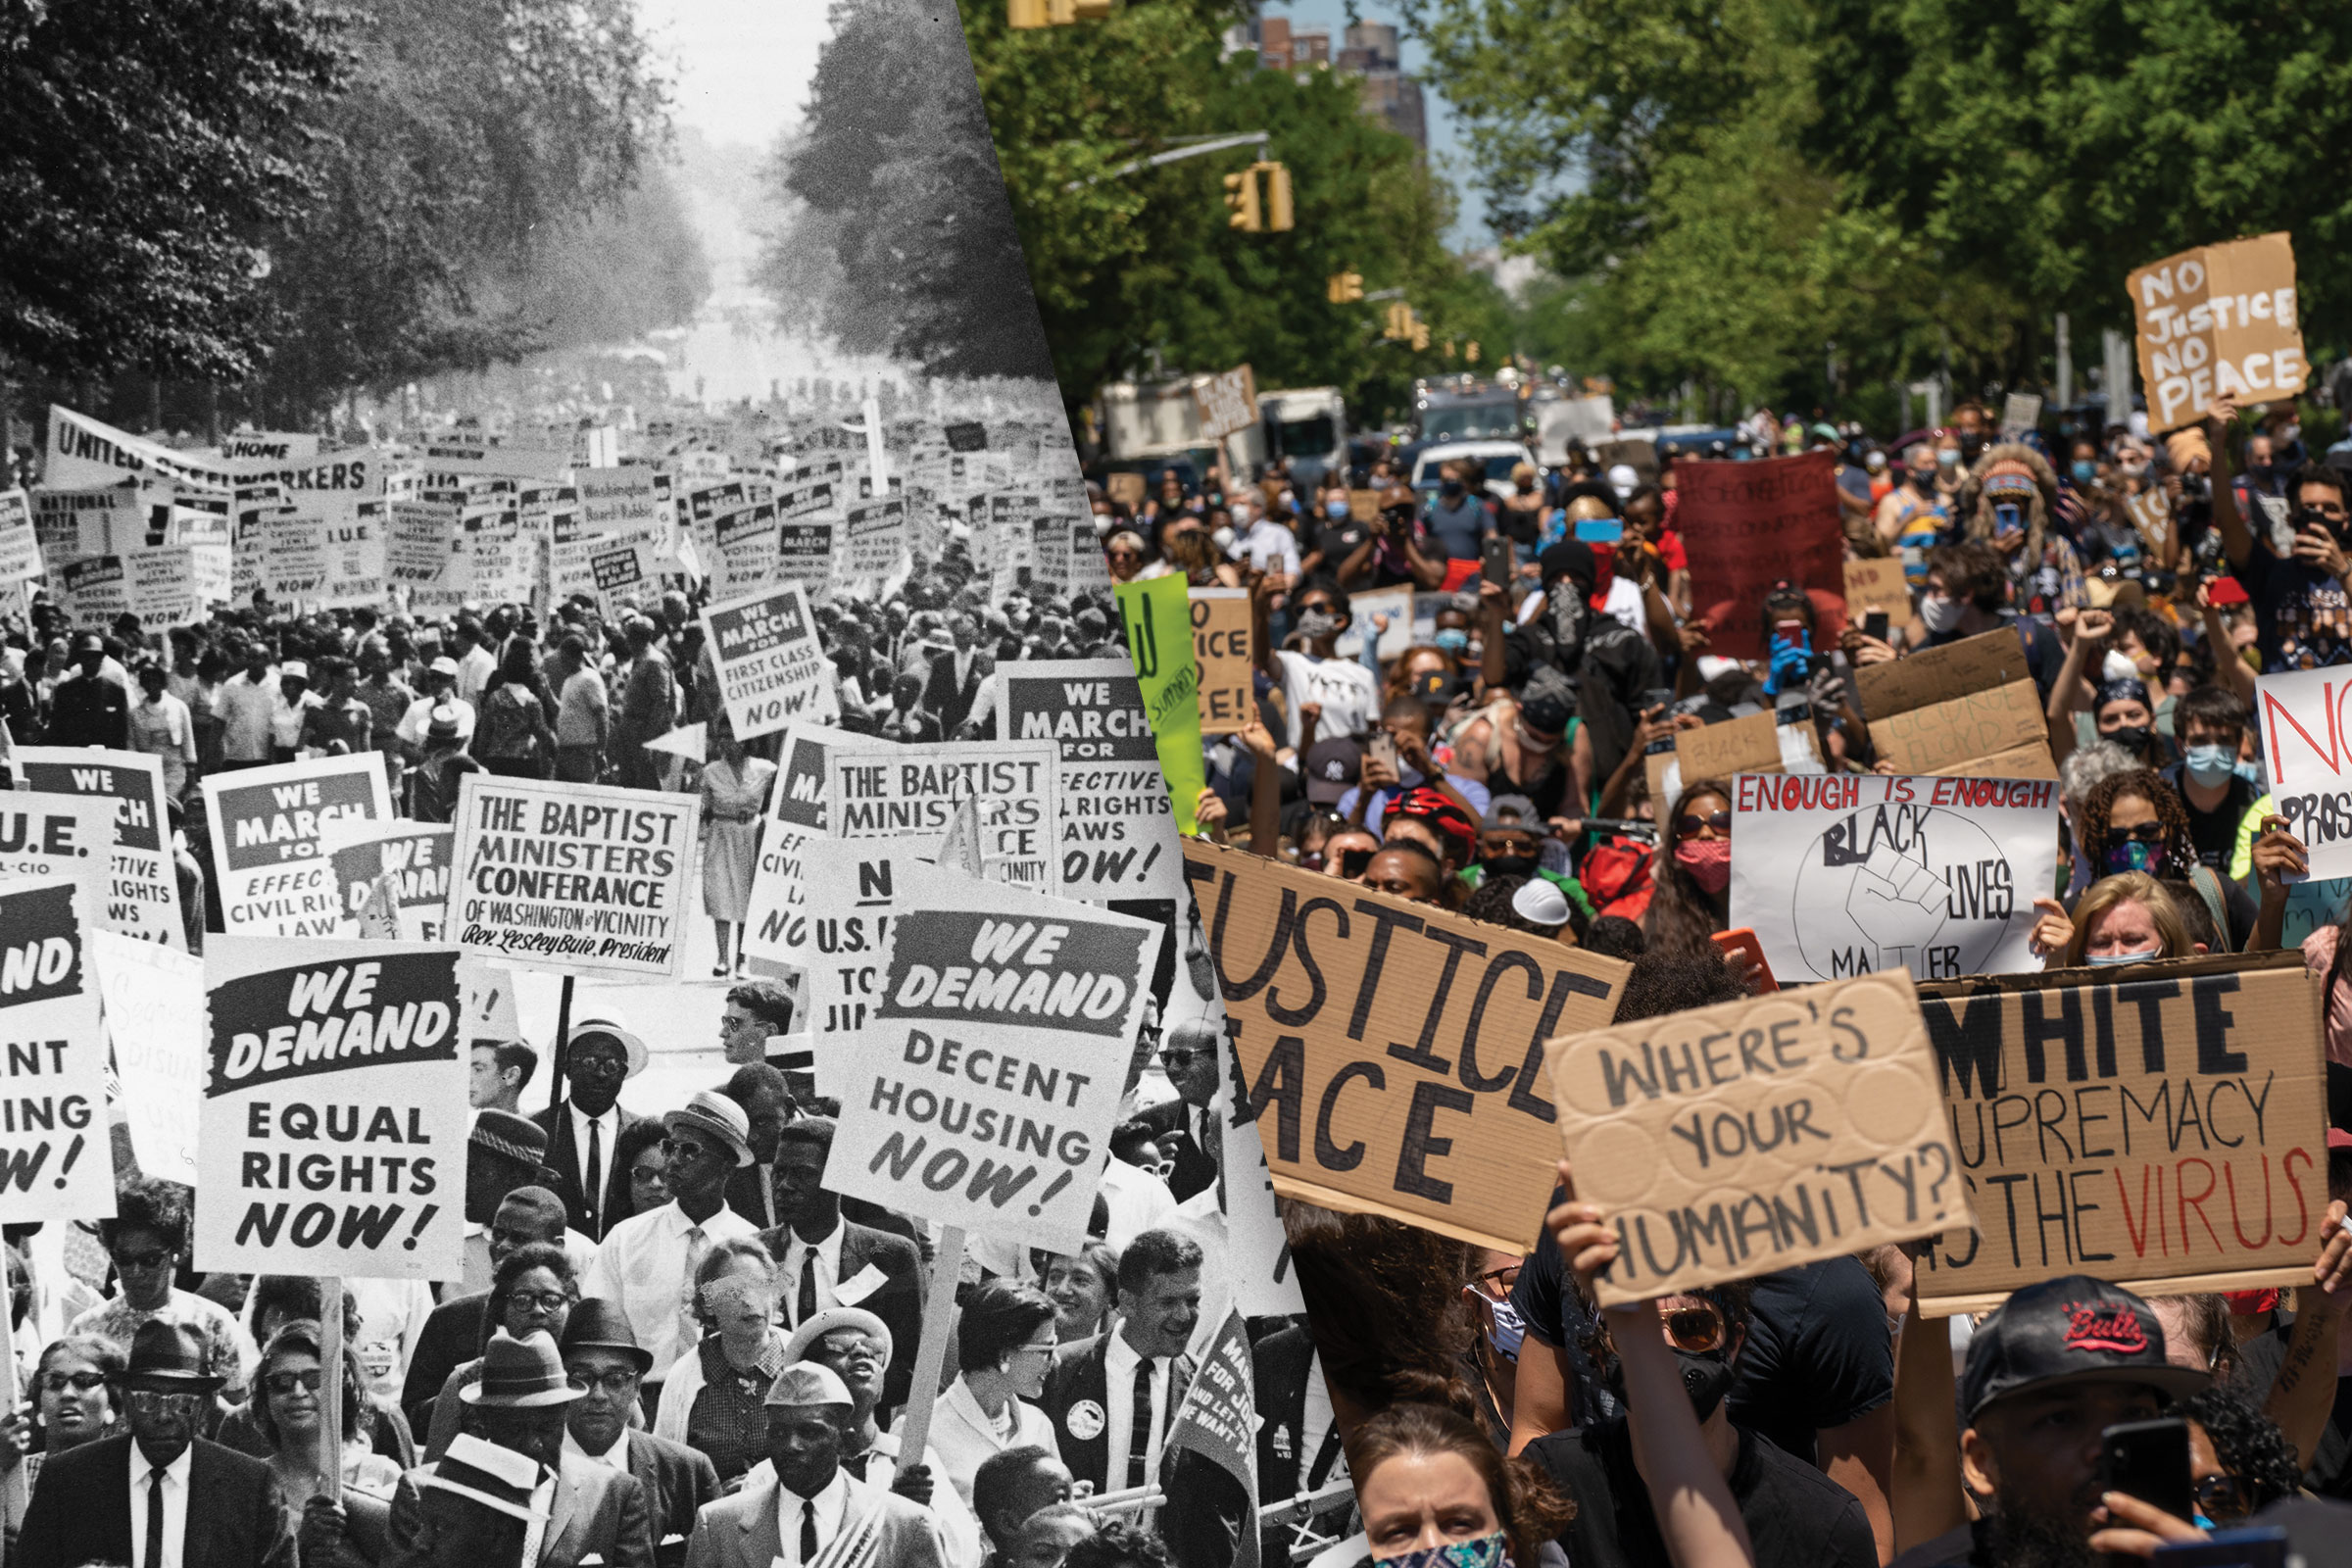 Left: Between 200,000 and 500,000 demonstrators march down Constitution Avenue during the March on Washington for Jobs and Freedom, Washington D.C., Aug. 28, 1963; Right: Protesters gather in Harlem to protest the recent death of George Floyd on May 30, 2020 in New York City. (Hulton Archive/Getty Images; David 'Dee' Delgado—Getty Images)